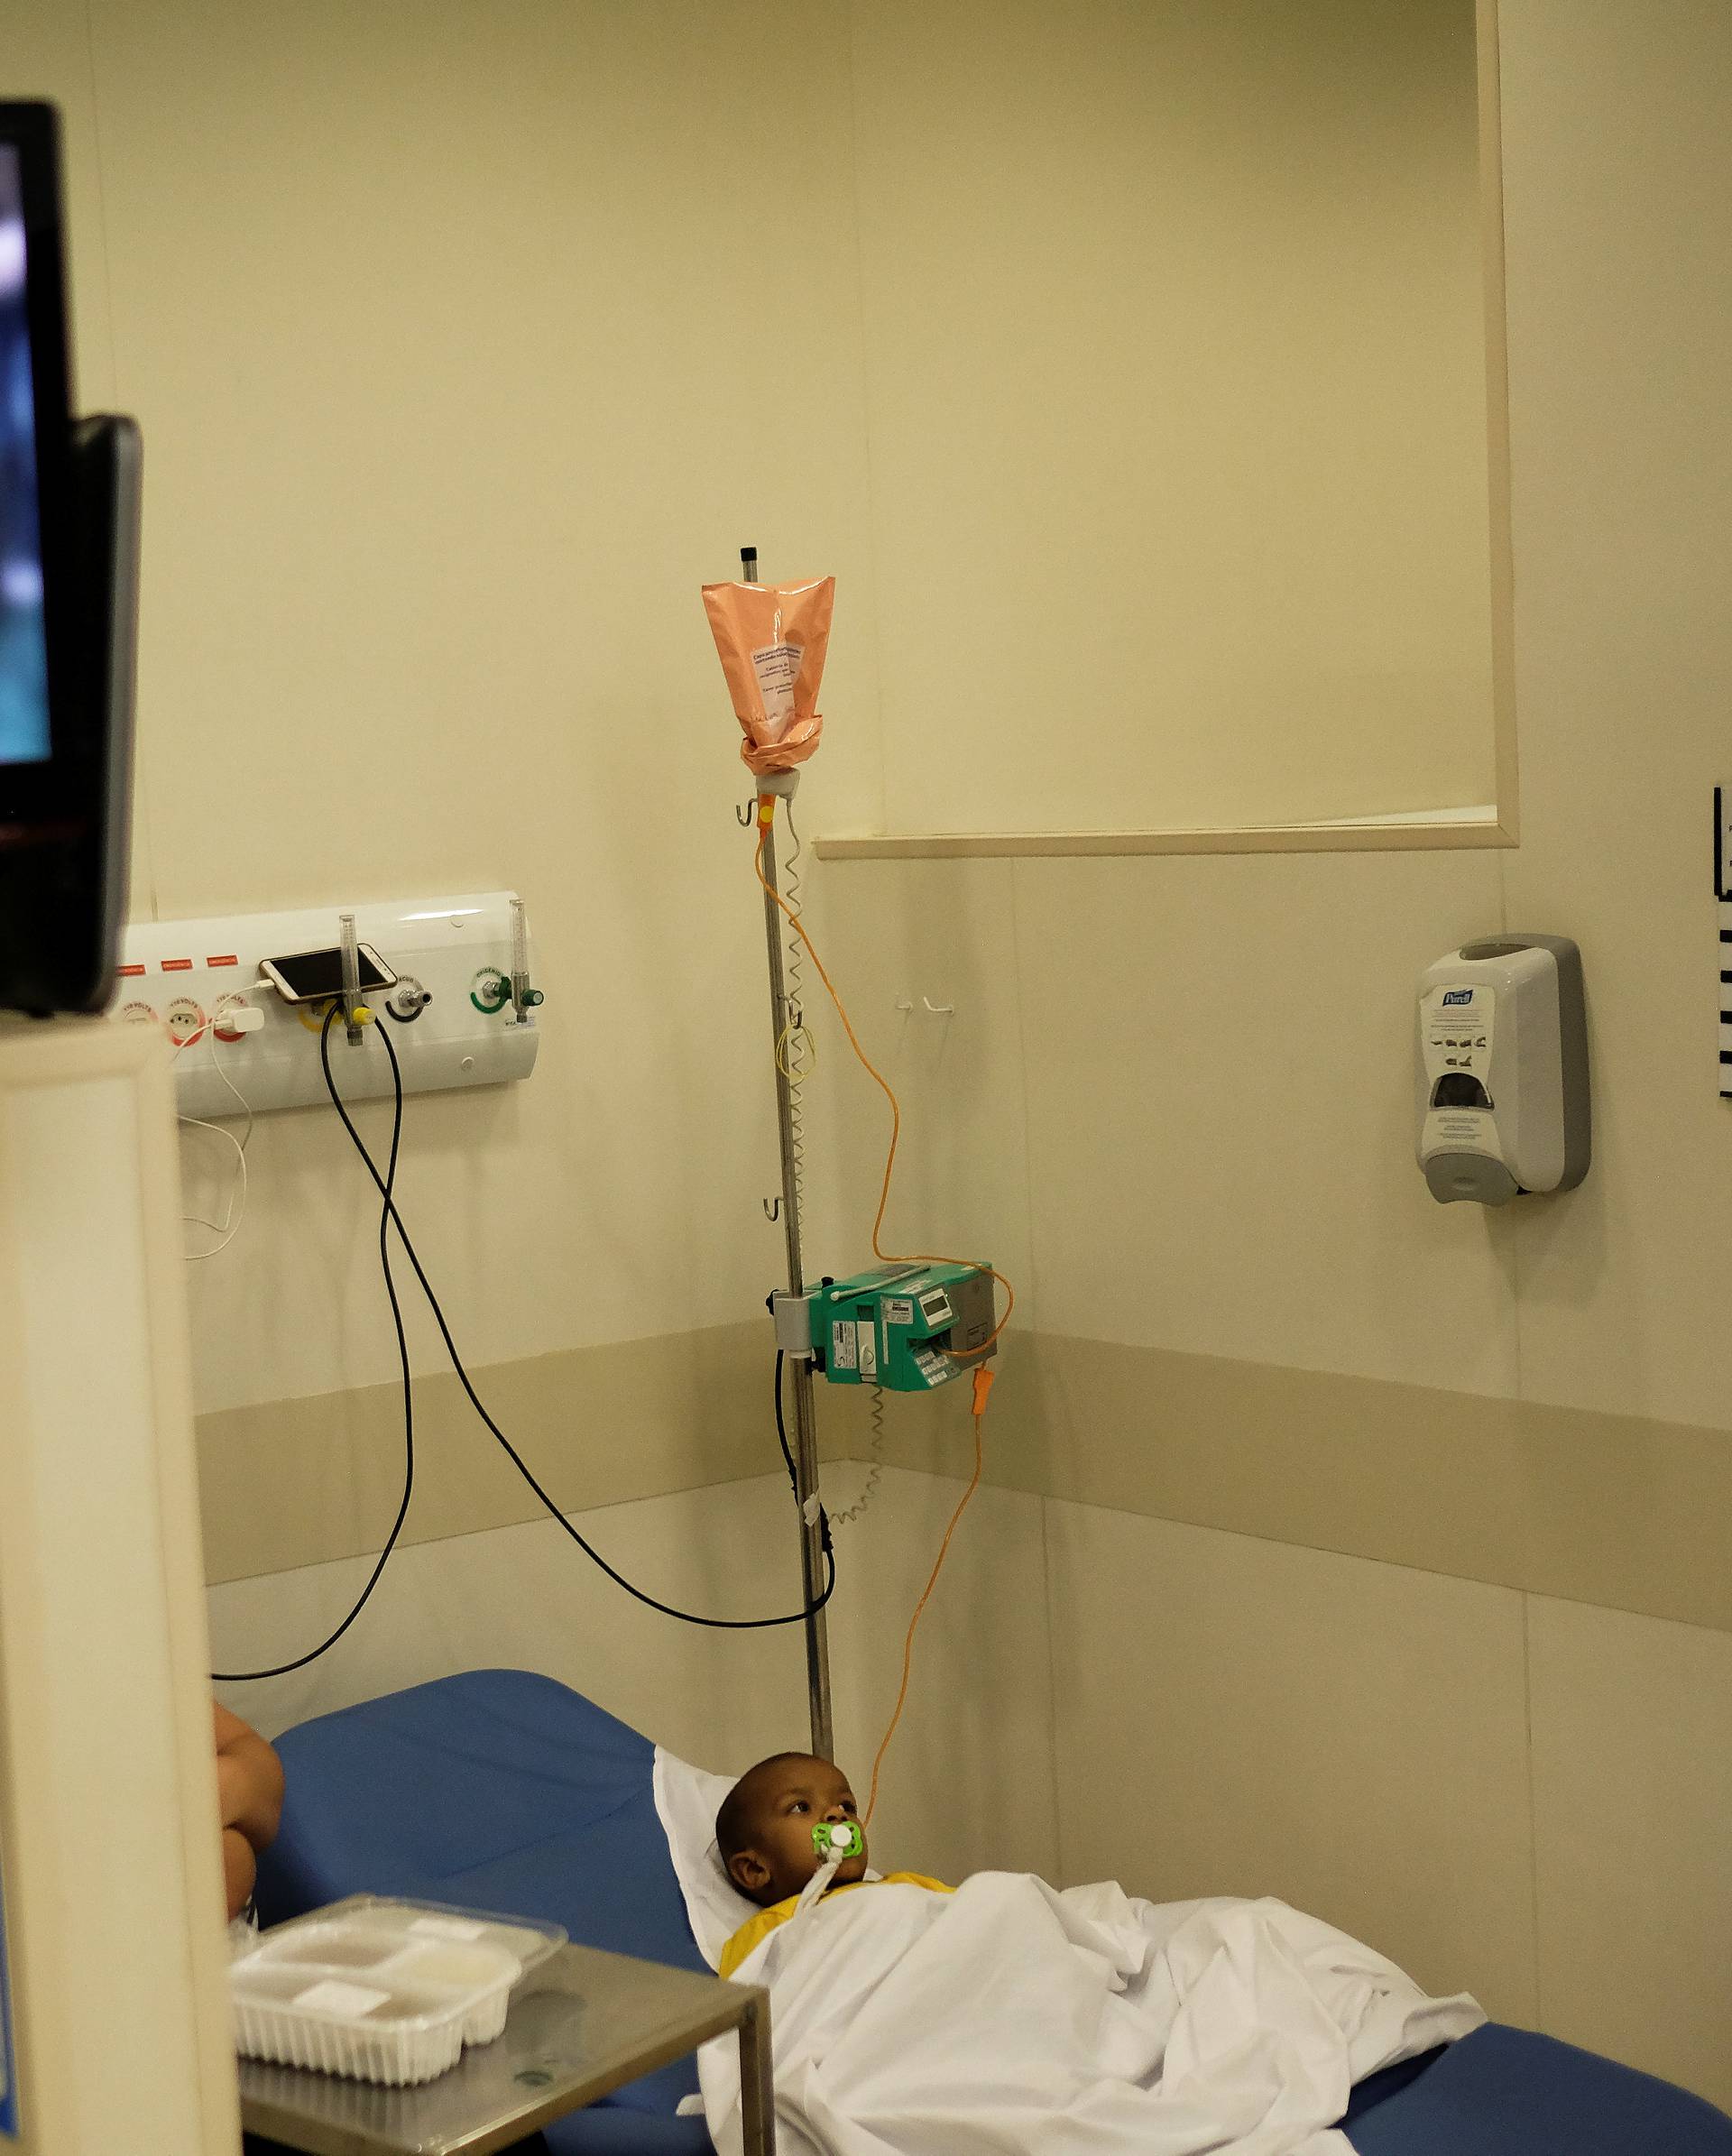 Brazilian patient Lucas wears a Brazil national soccer team t-shirt as he watches Neymar goal against Mexico at the Cancer Itaci Hospital in Sao Paulo